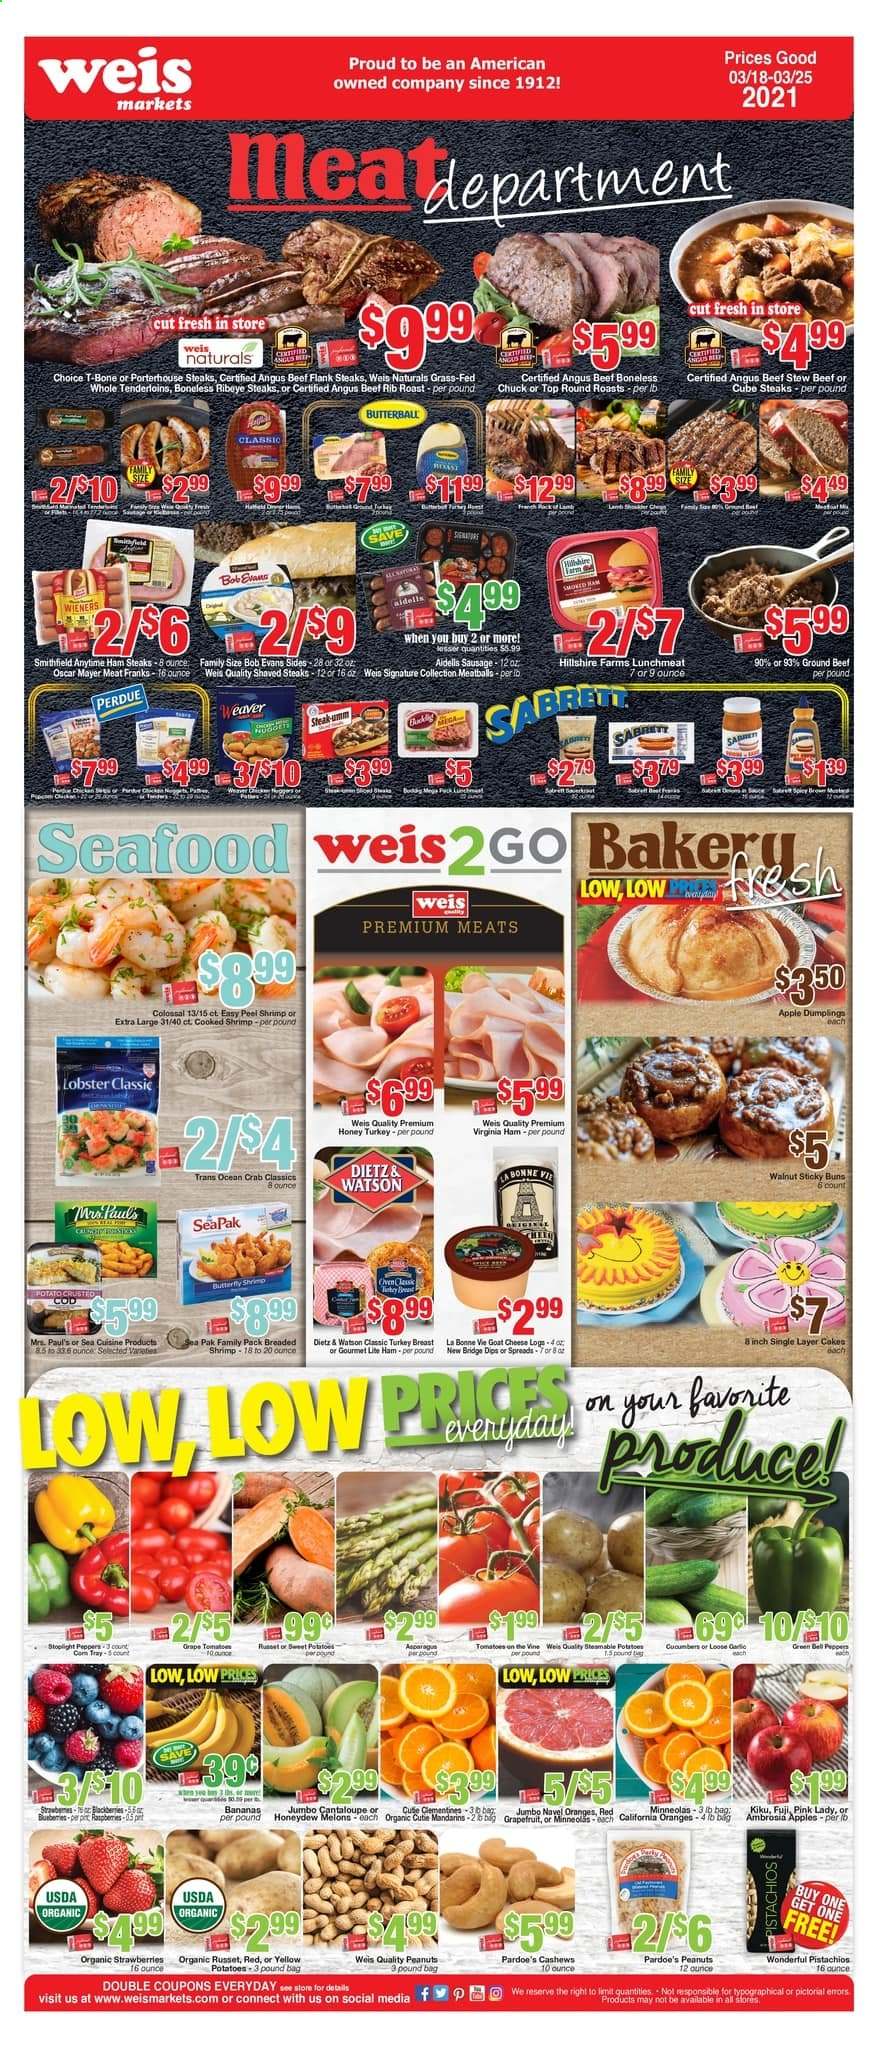 thumbnail - Weis Flyer - 03/18/2021 - 03/25/2021 - Sales products - cantaloupe, honeydew, cake, buns, apples, bananas, oranges, Butterball, turkey breast, Perdue®, beef meat, ground beef, t-bone steak, steak, portehouse steak, Bob Evans, lobster, seafood, crab, shrimps, meatballs, ham, virginia ham, Oscar Mayer, Dietz & Watson, sausage, lunch meat, goat cheese, cheese, mandarines, honey, cashews, walnuts, peanuts, pistachios, clementines, melons. Page 4.